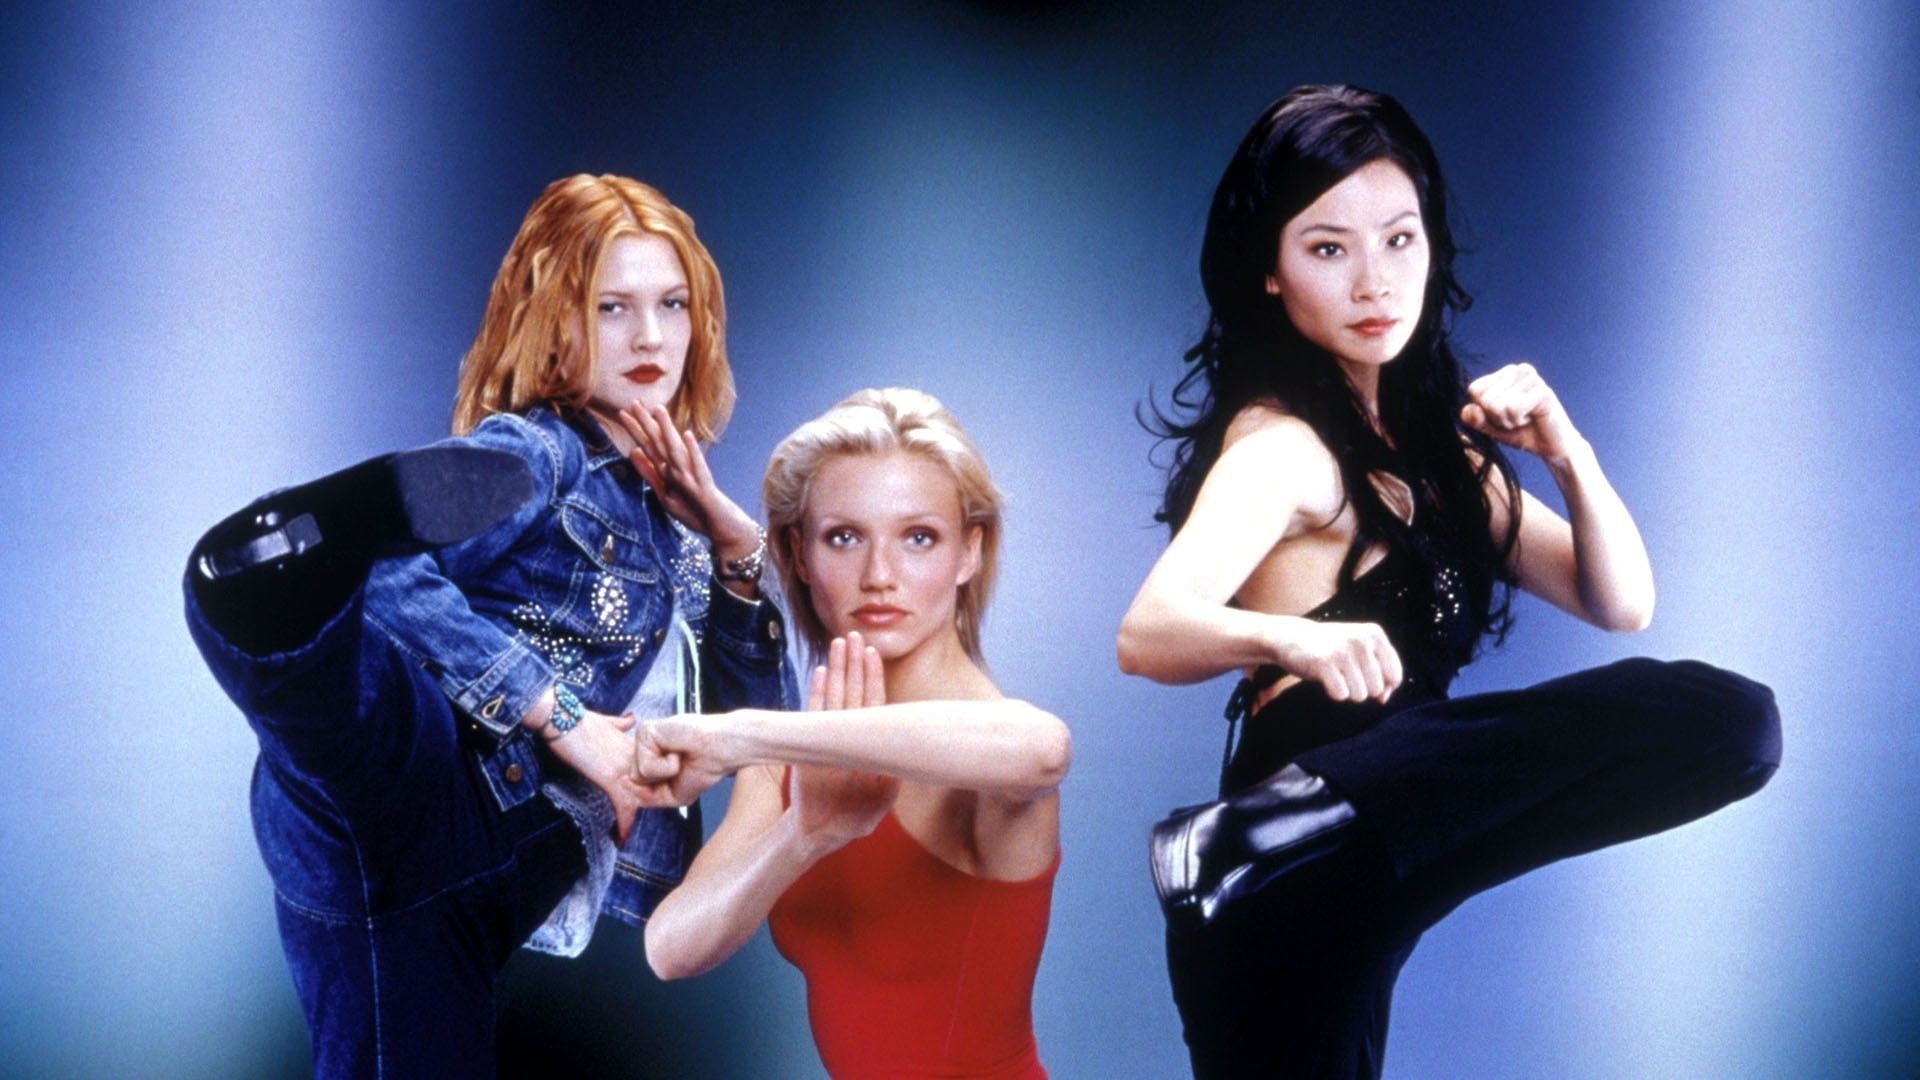 Charlie's Angels, 2000 film, Movie backdrops, Exciting action moments, 1920x1080 Full HD Desktop